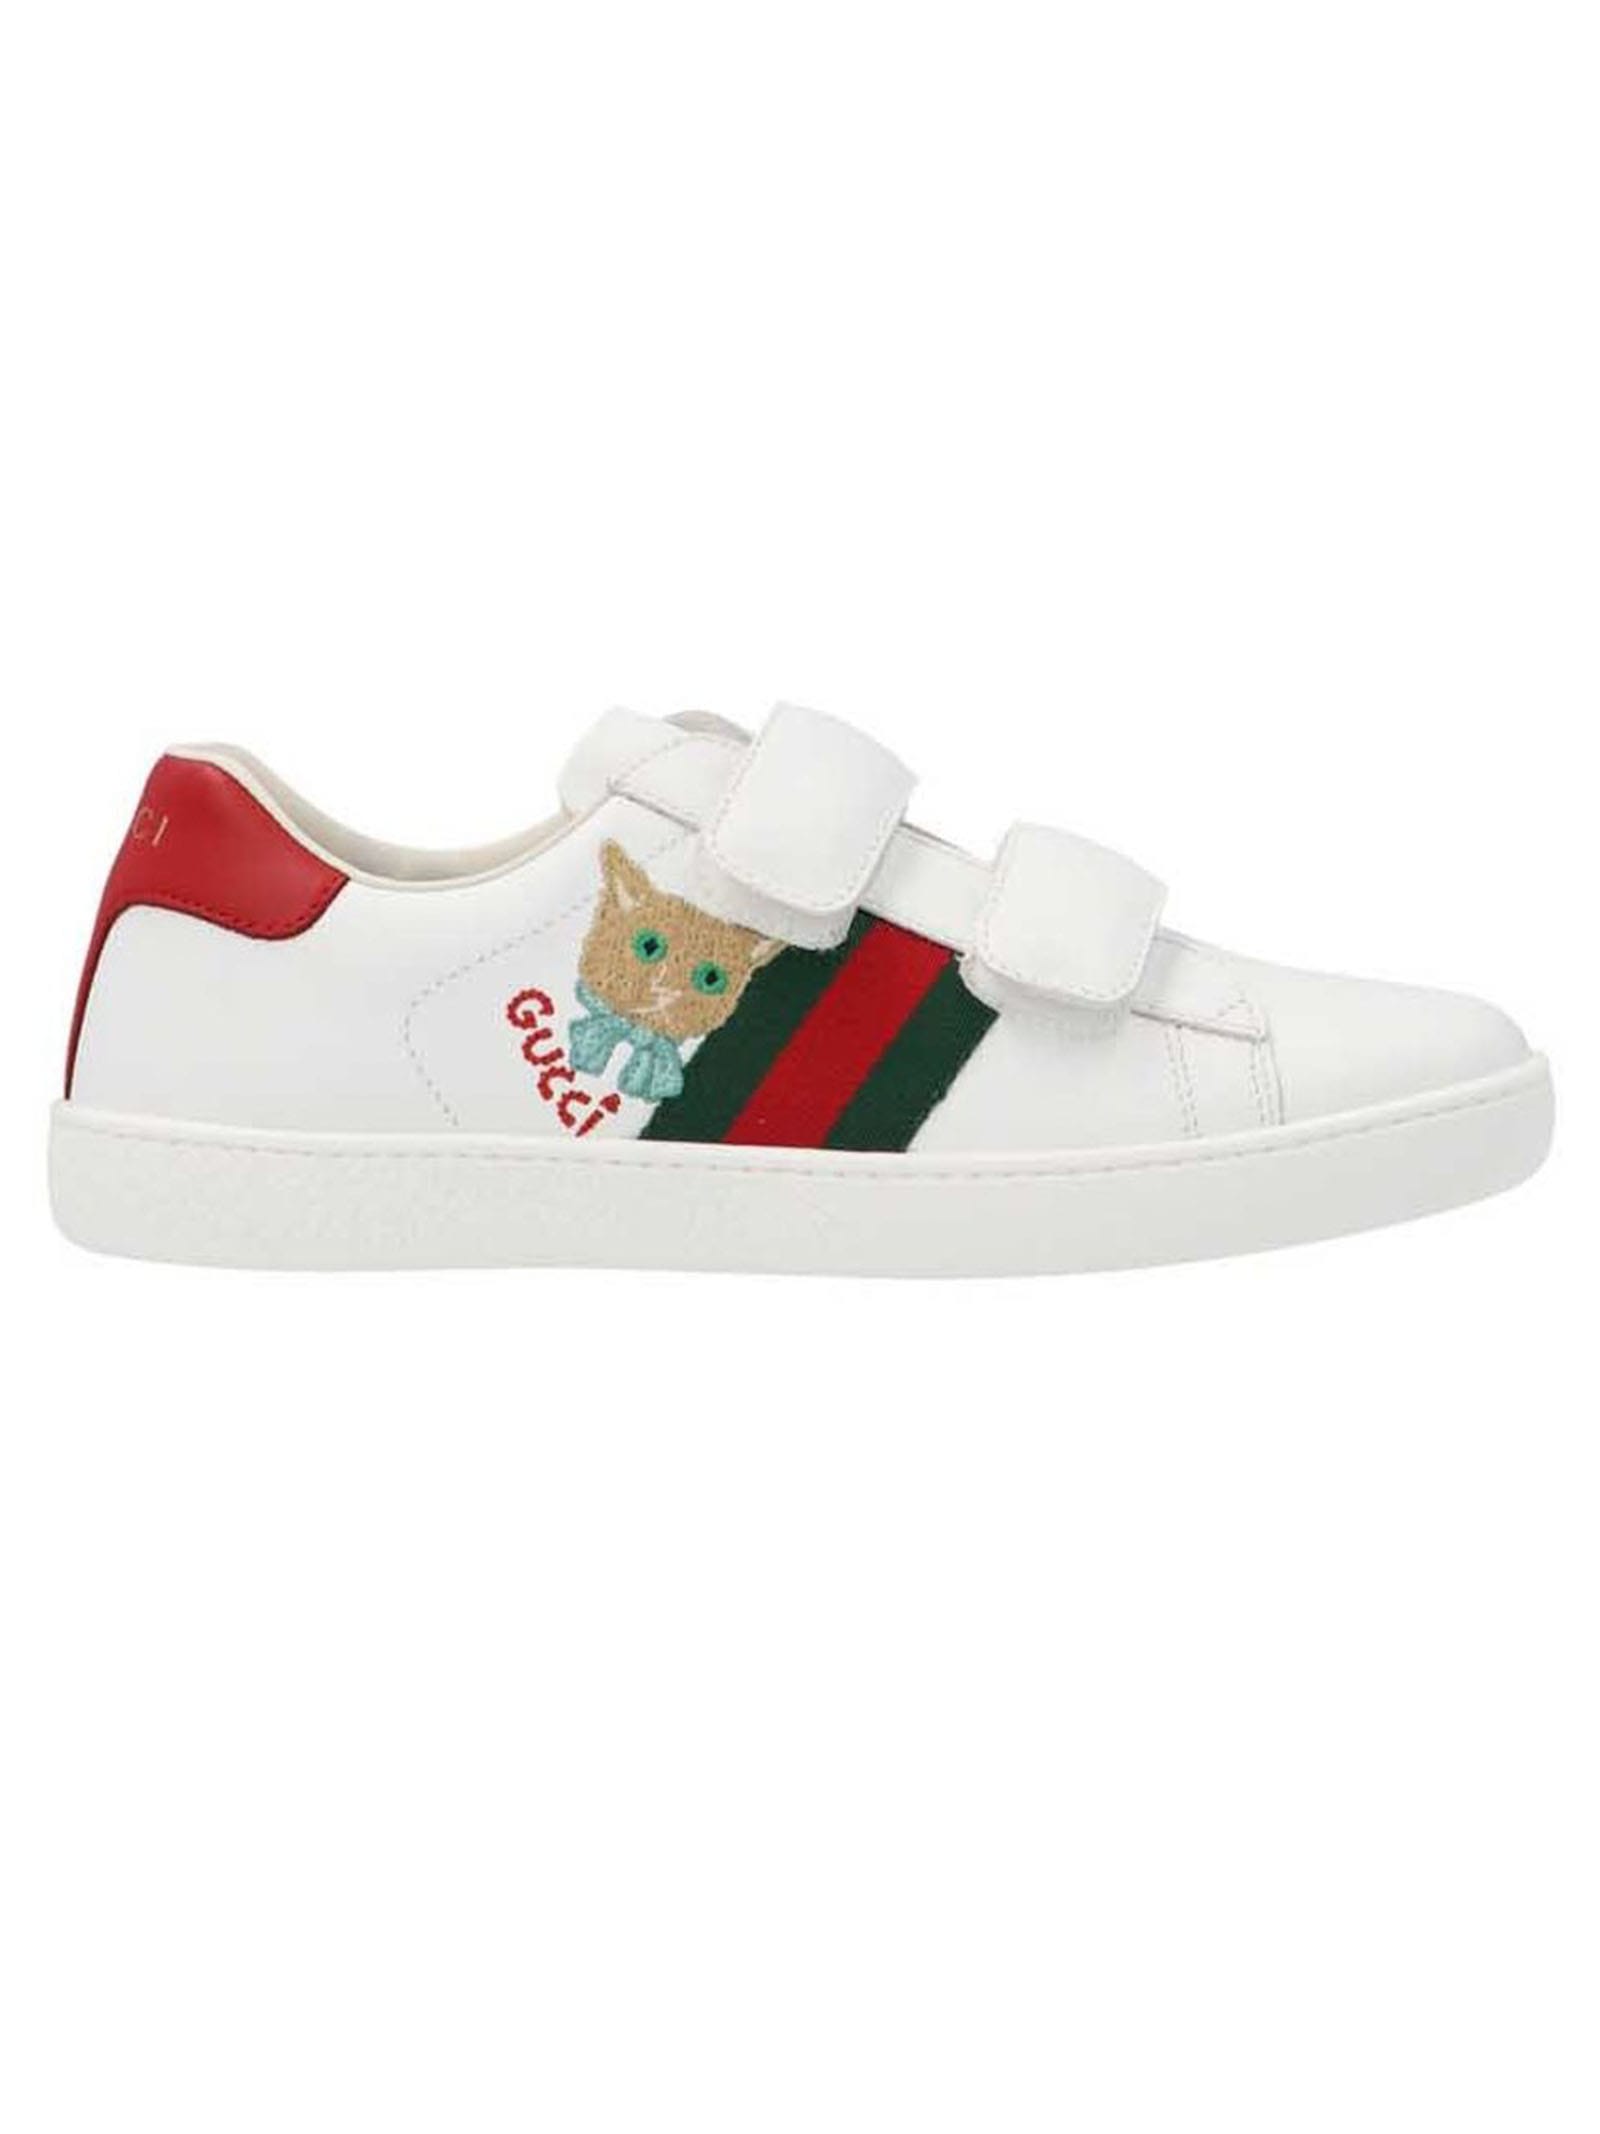 Gucci Childrens Ace Sneaker